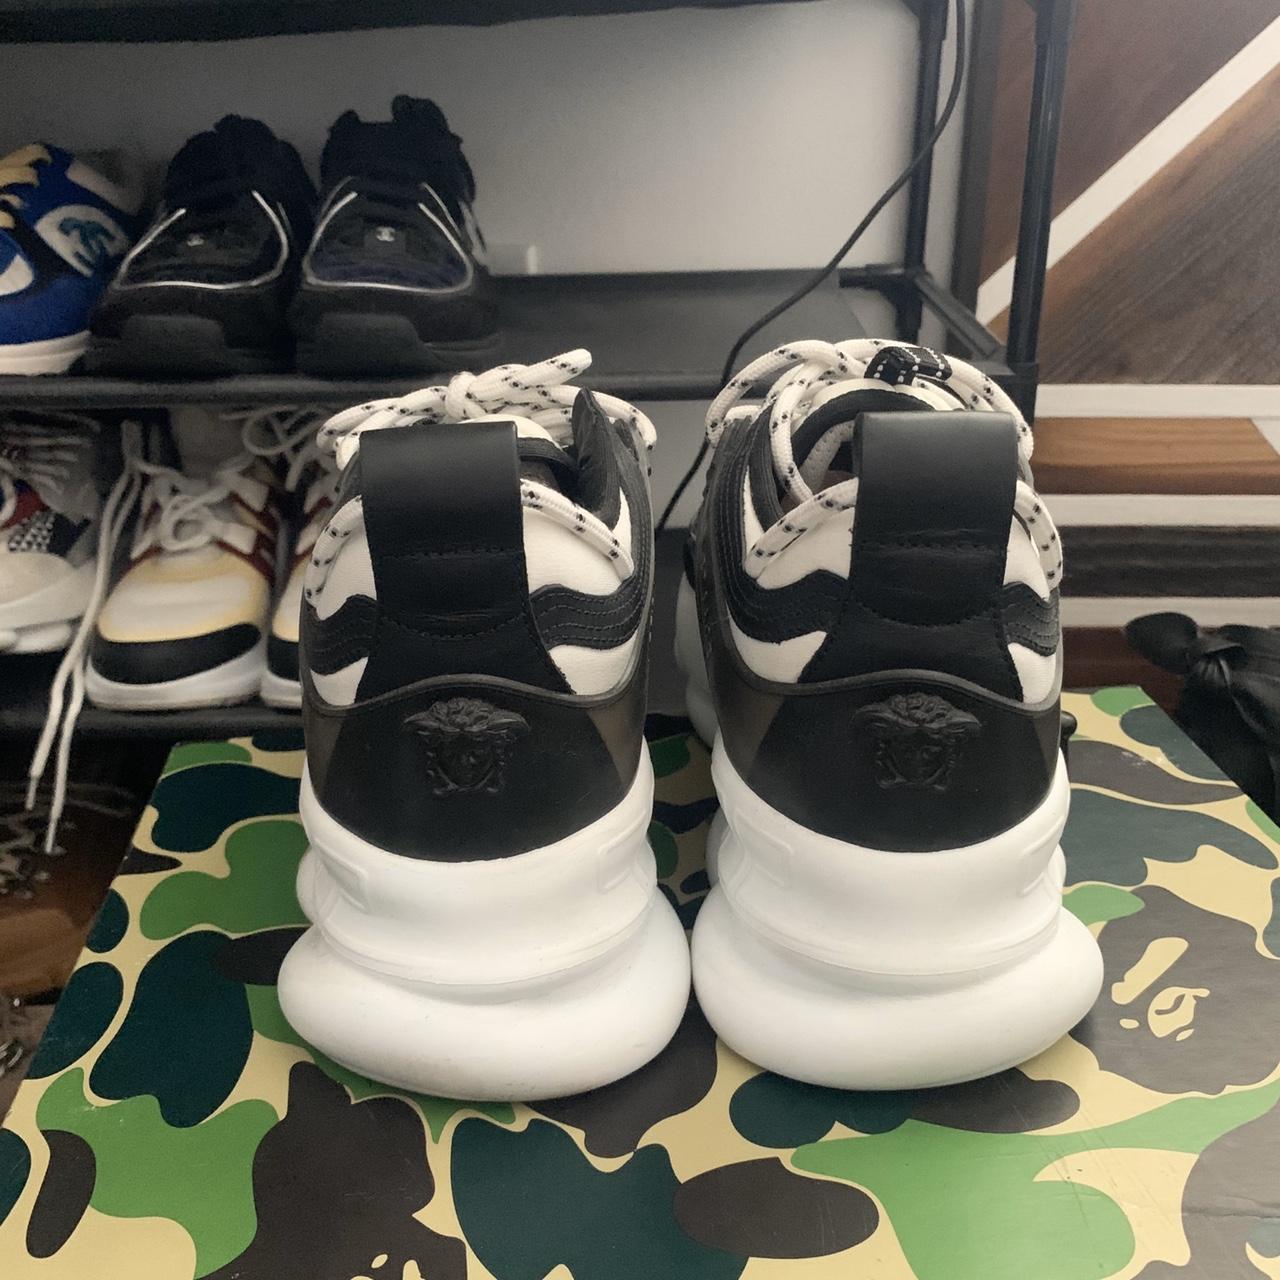 Versace Chain Reaction Sneakers - A&V Pawn